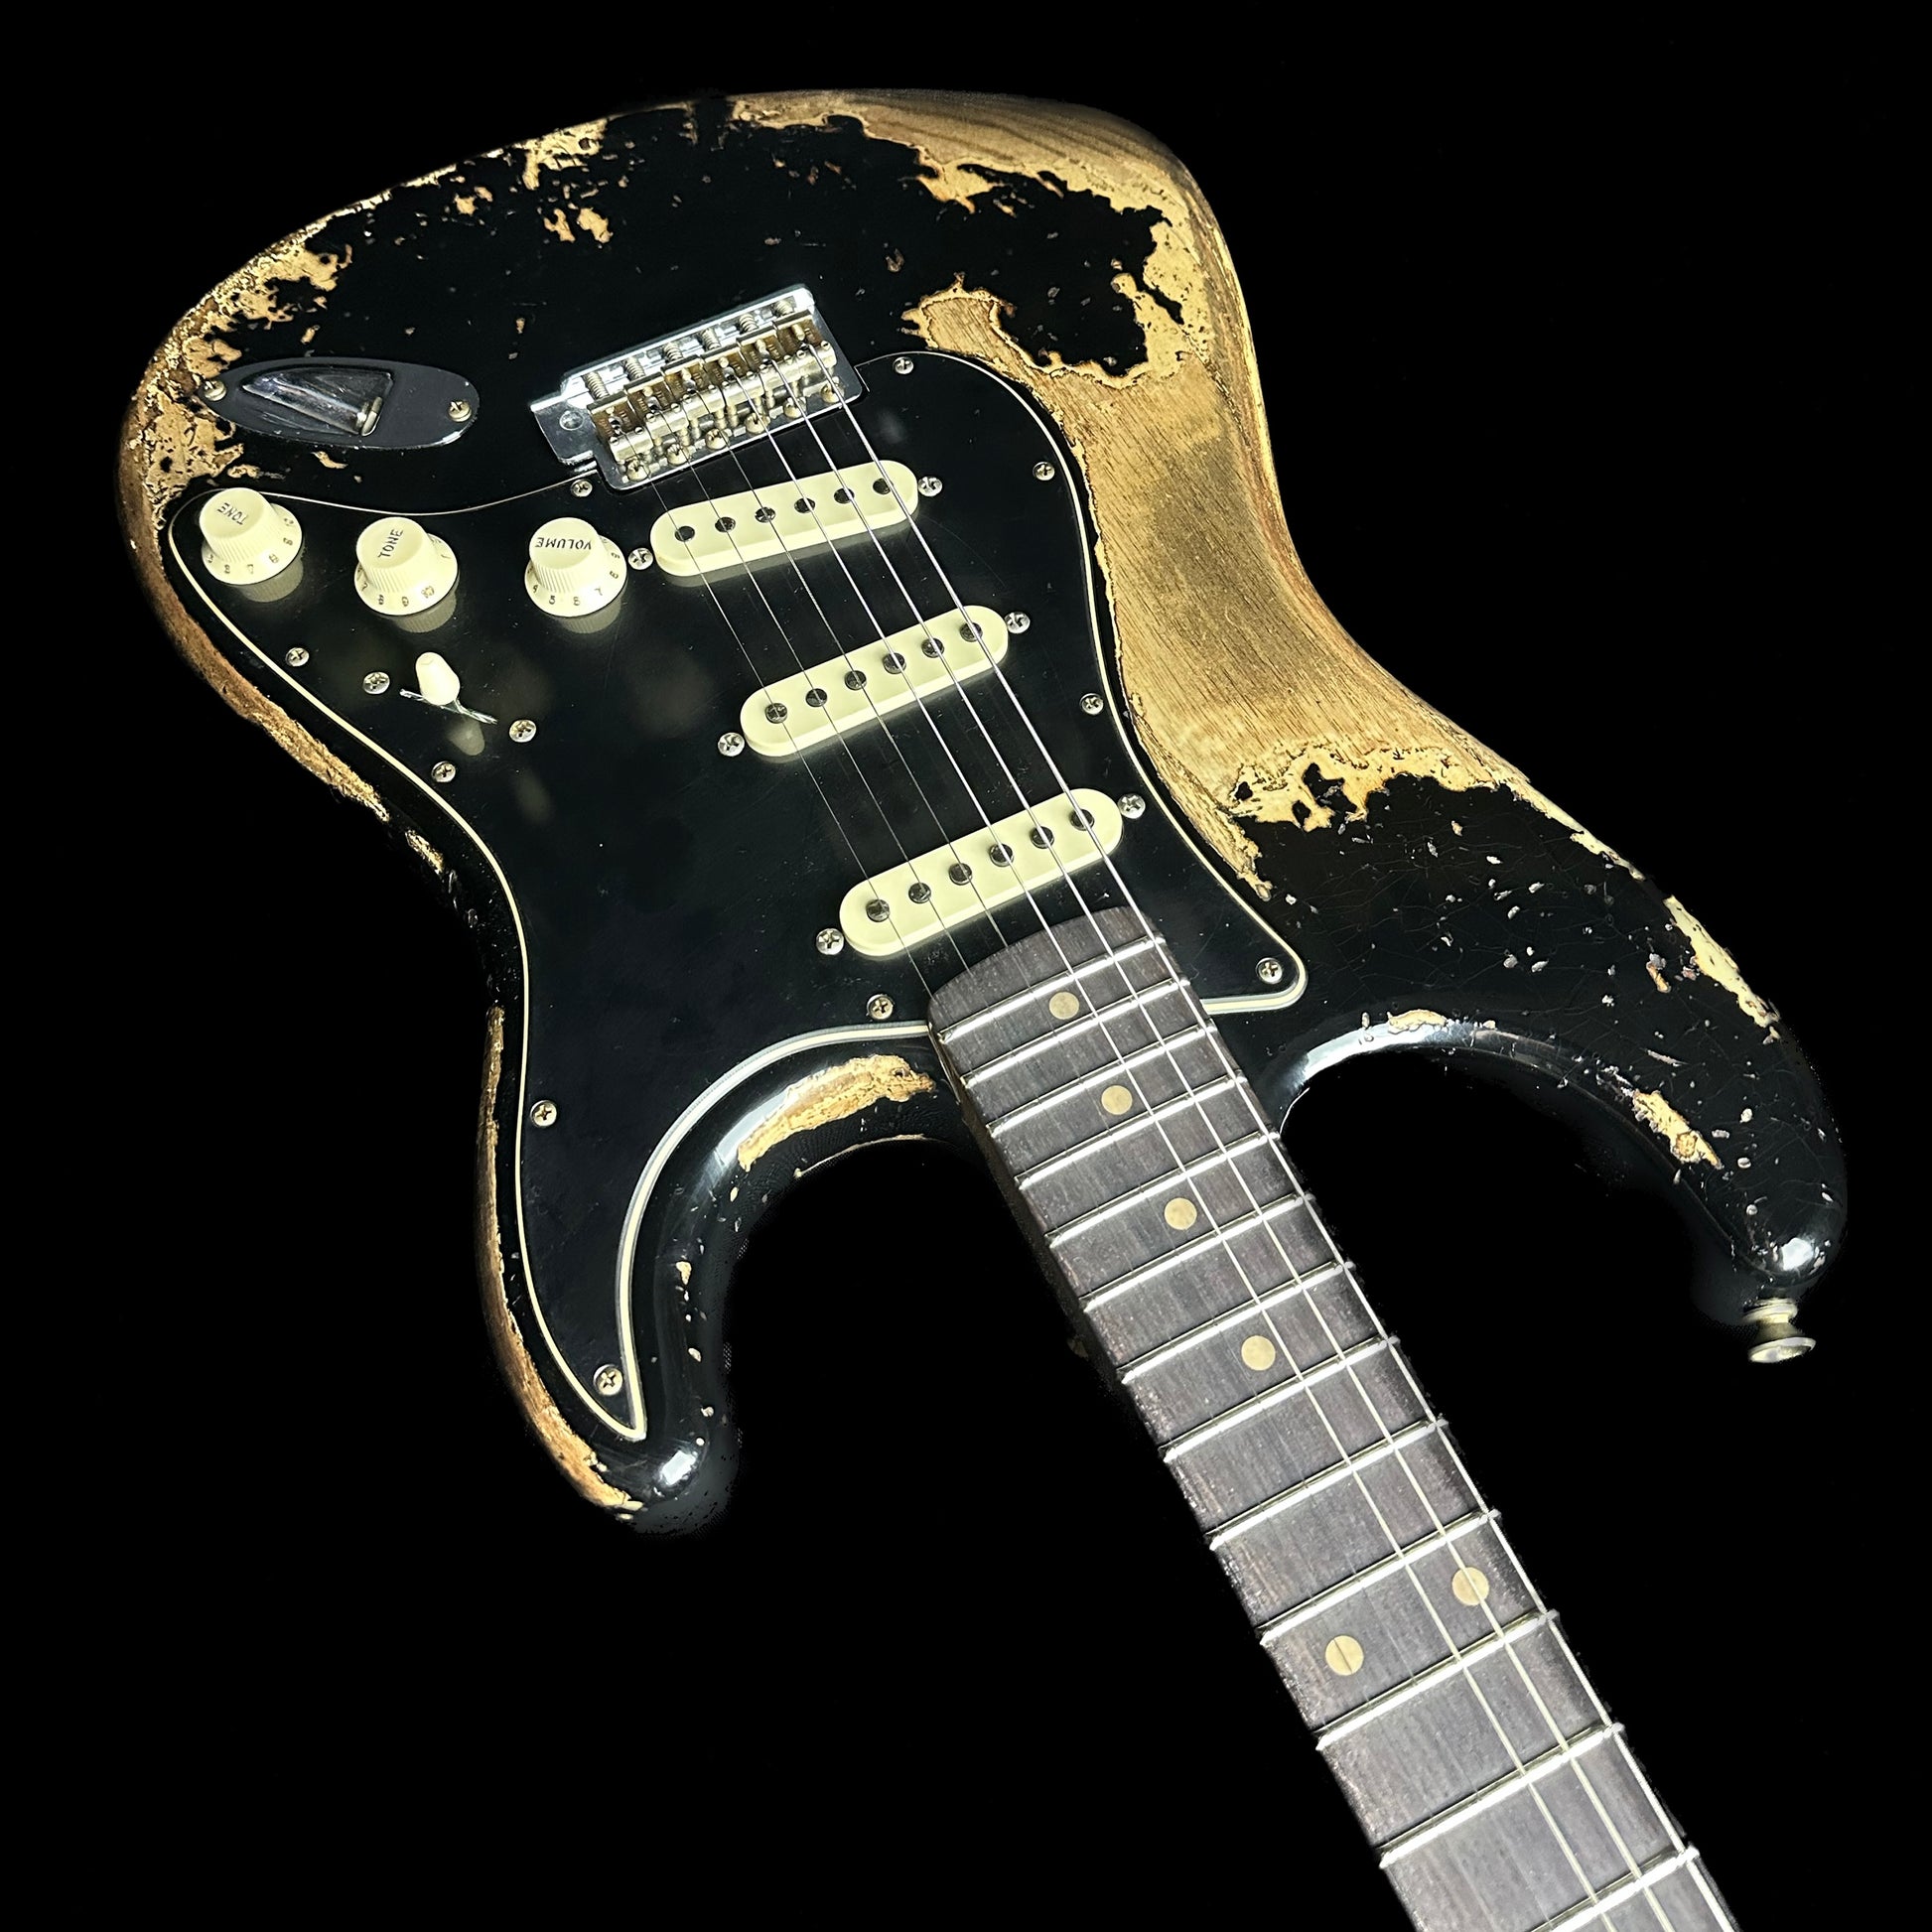 Upside down angle of Fender Custom Shop Limited Edition Poblano Stratocaster Super Heavy Relic Aged Black.